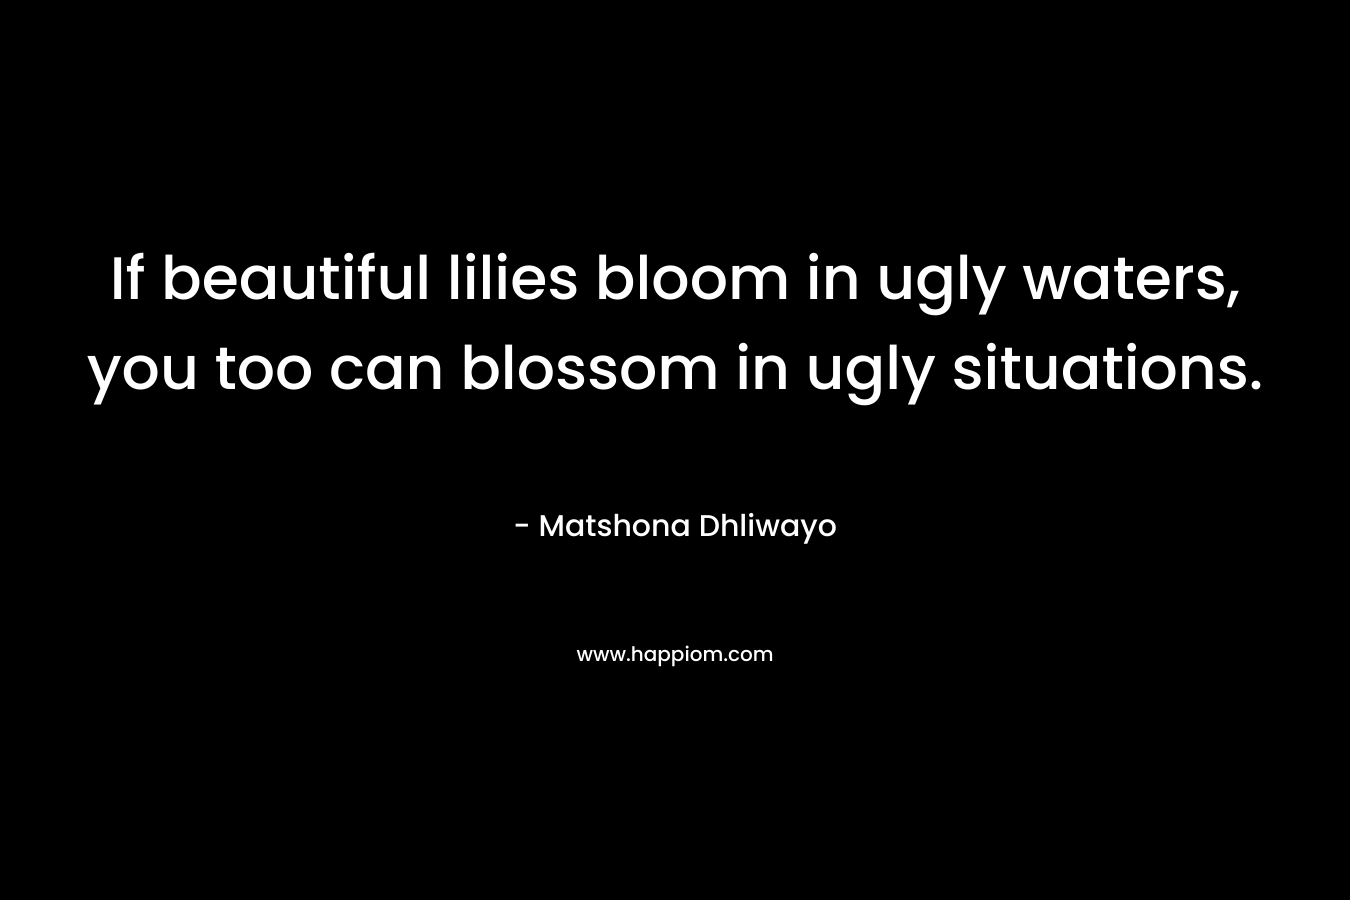 If beautiful lilies bloom in ugly waters, you too can blossom in ugly situations.